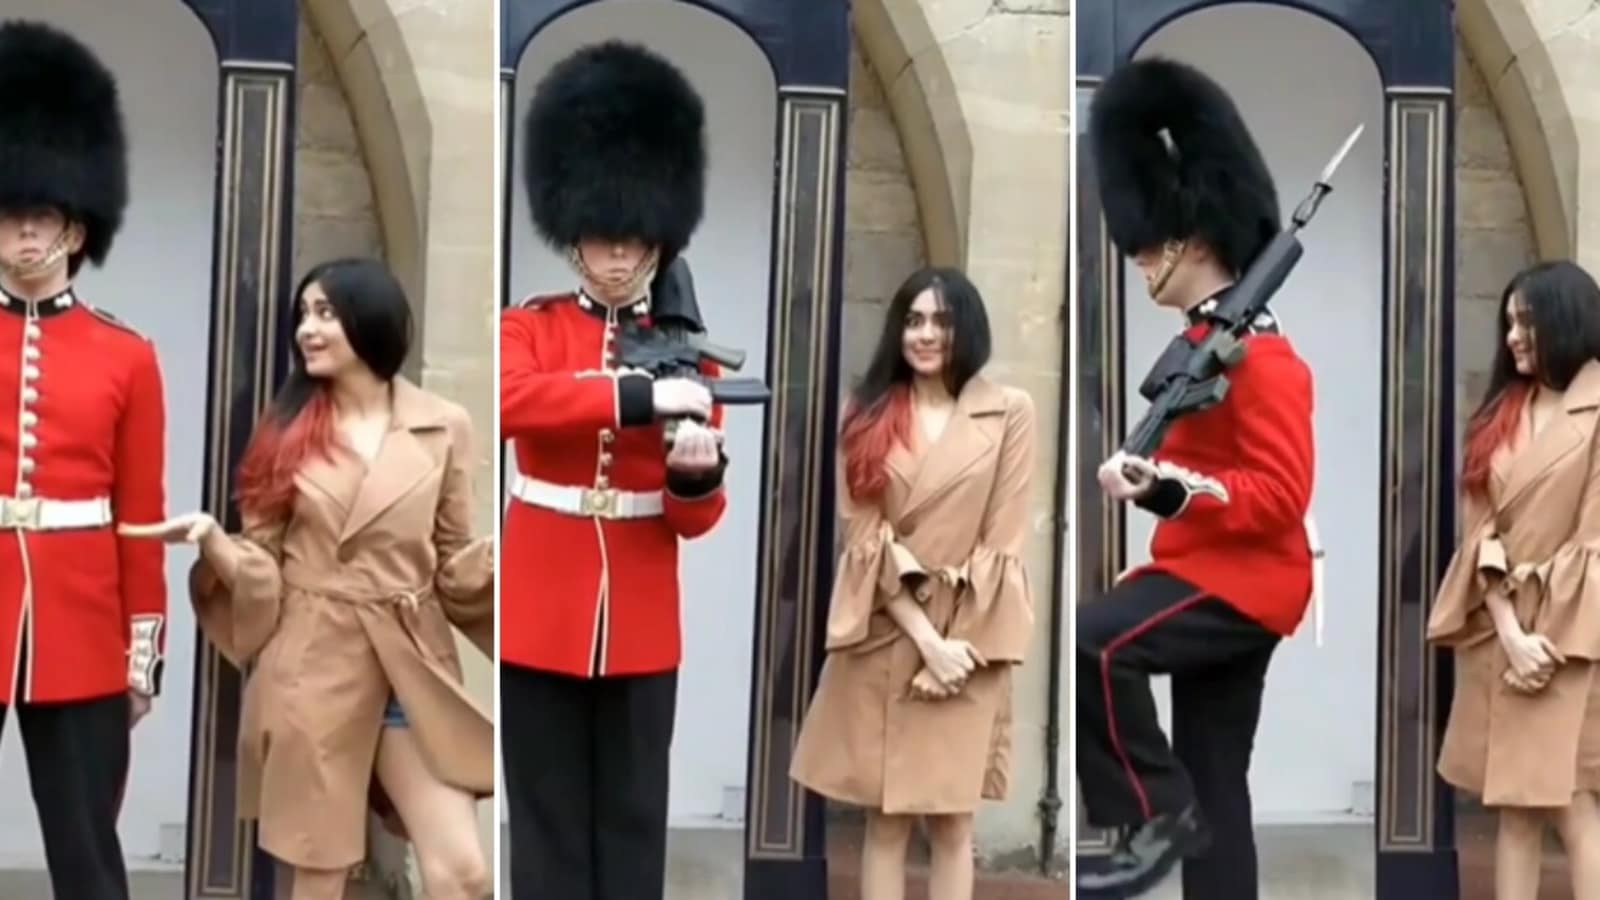 Hindi News: Adah Sharma issues clarification for video of her dancing next to British guard: ‘British ruled our land for 200 years’